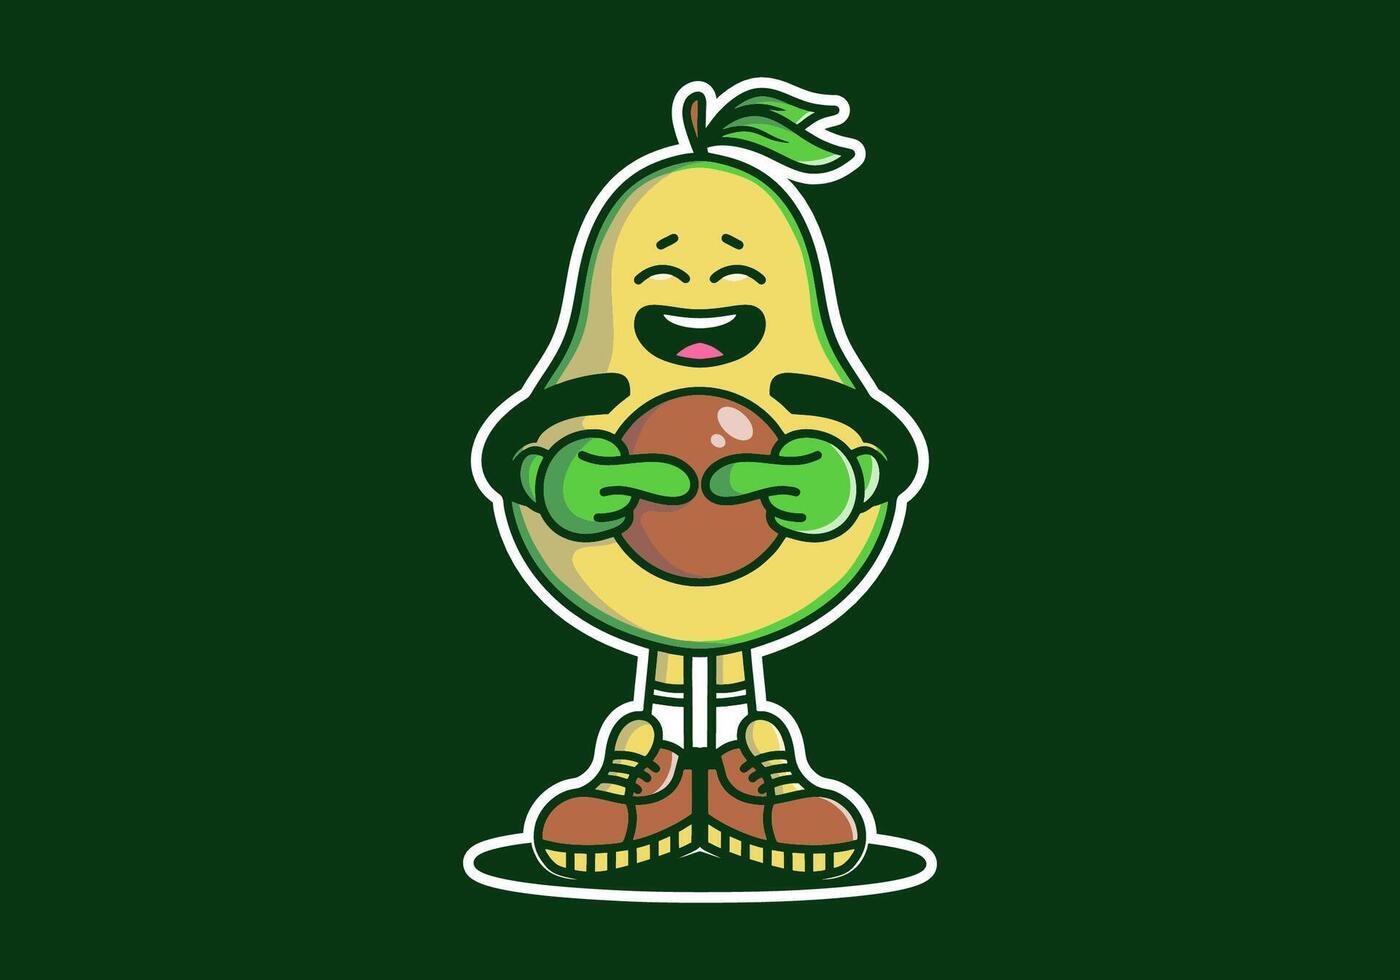 Mascot character design of avocado with shy face vector